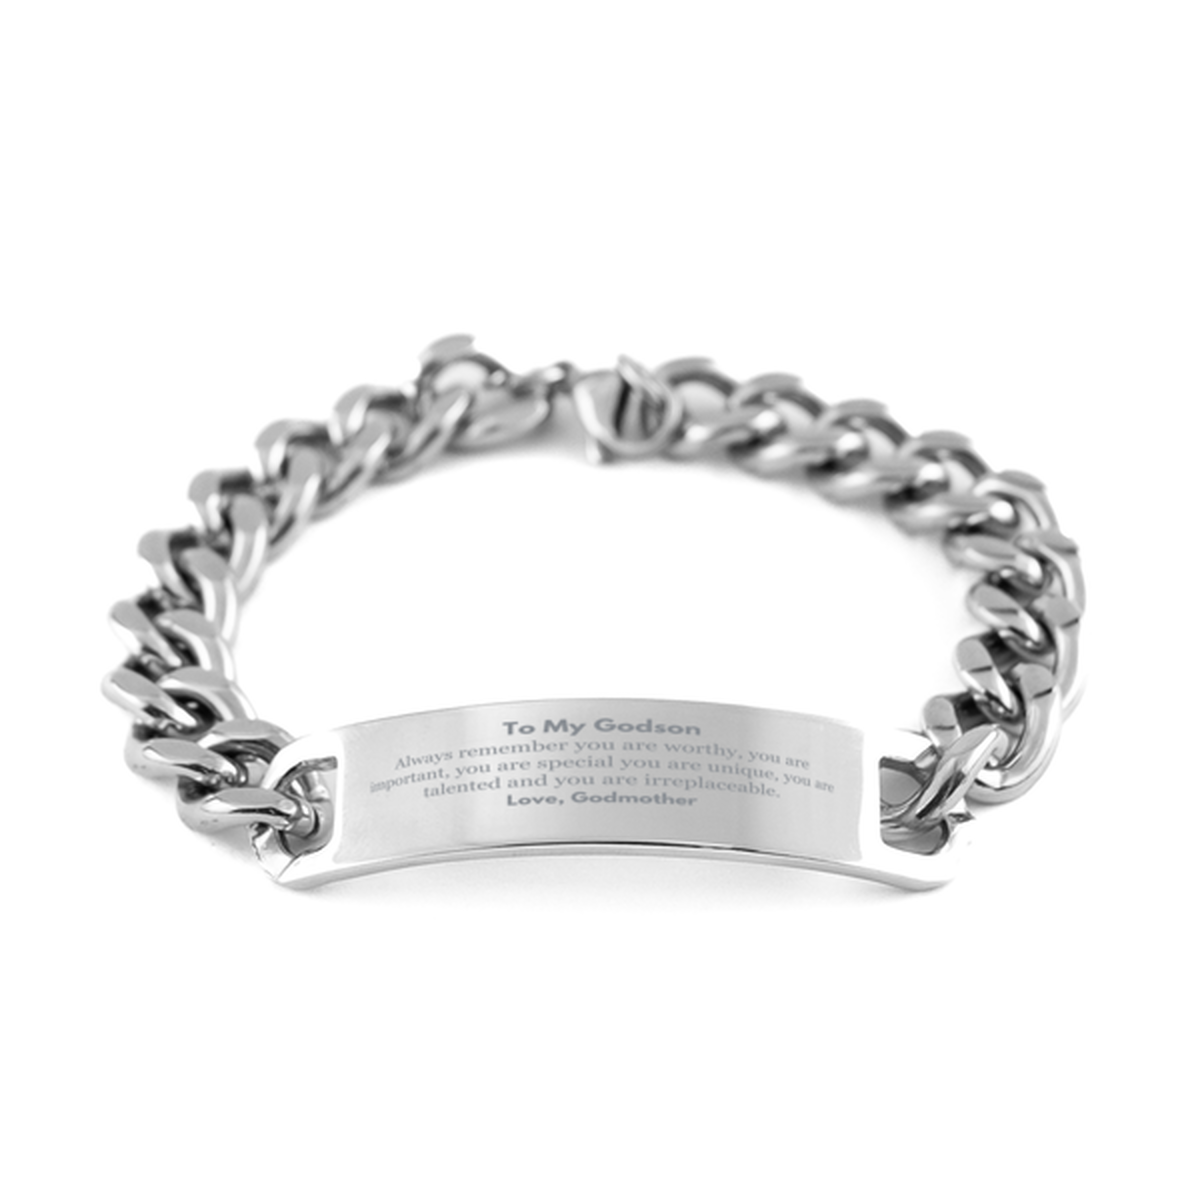 Godson Birthday Gifts from Godmother, Inspirational Cuban Chain Stainless Steel Bracelet for Godson Christmas Graduation Gifts for Godson Always remember you are worthy, you are important. Love, Godmother